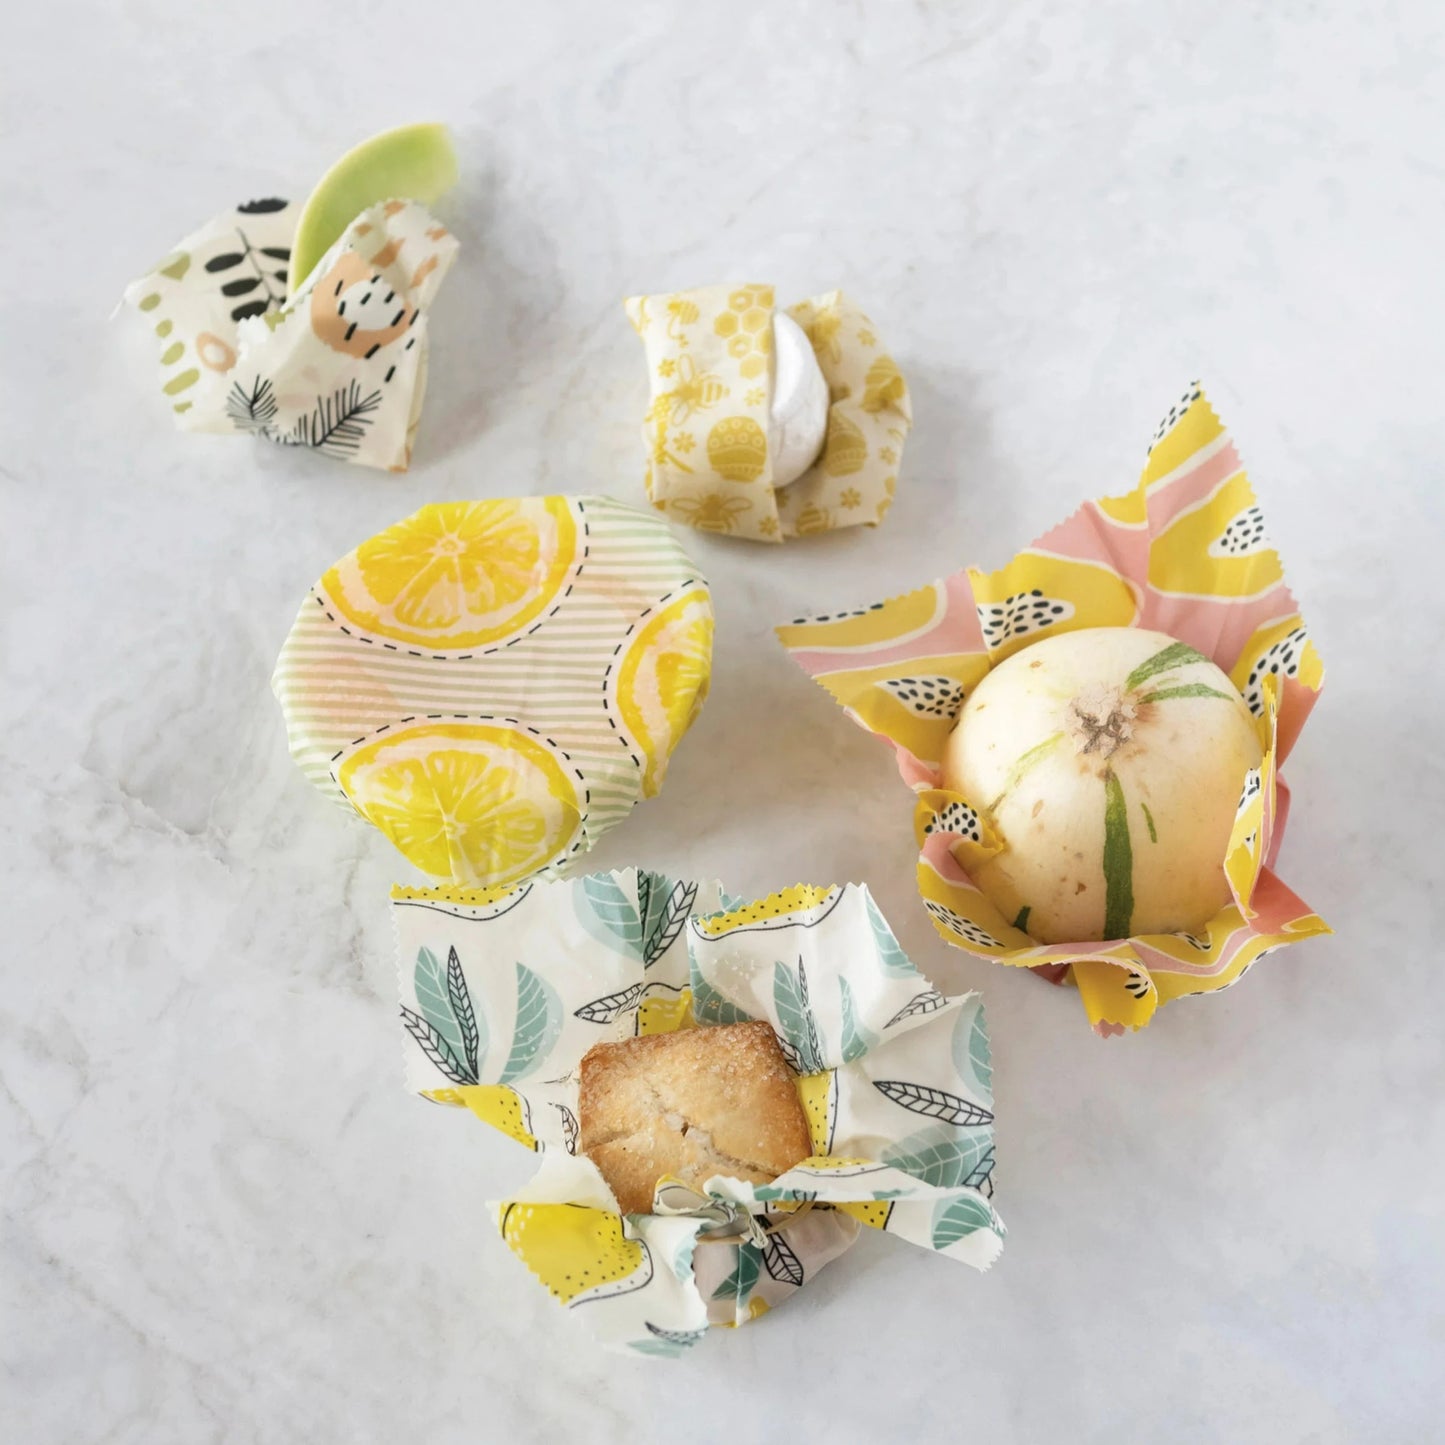 Set of 3 Square Reusable Fabric Beeswax Food Covers with Prints